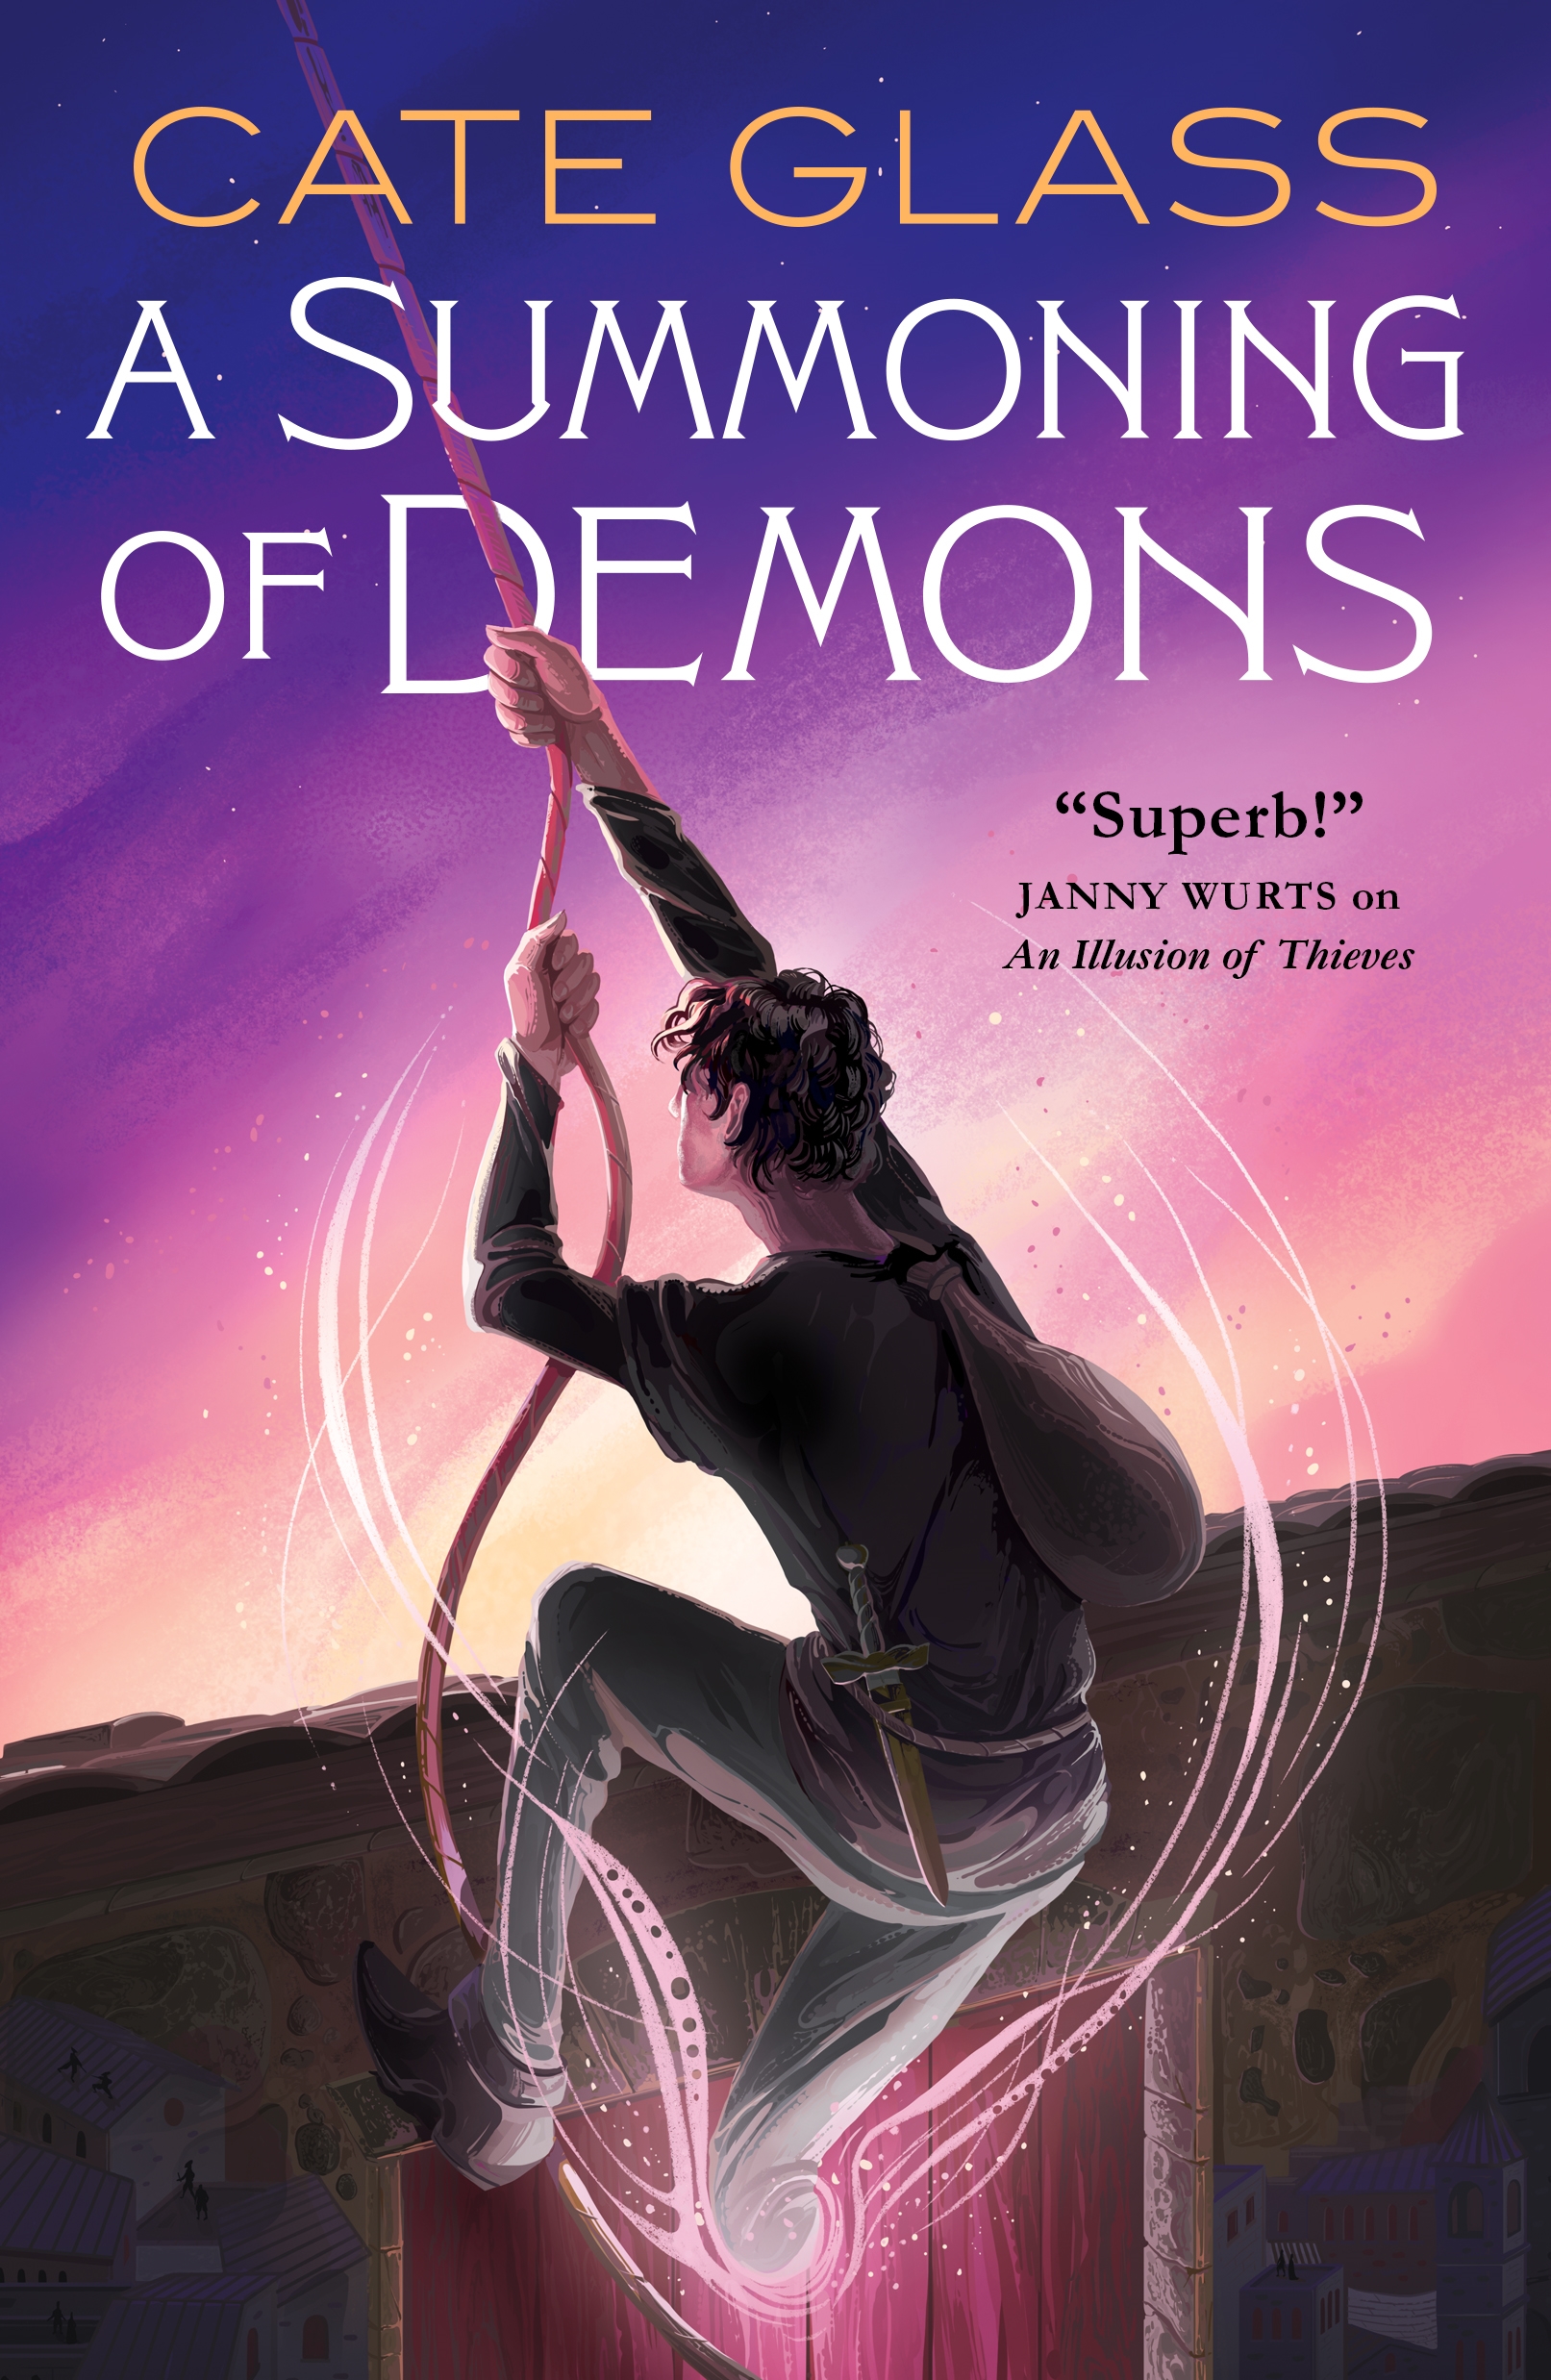 A Summoning of Demons by Cate Glass